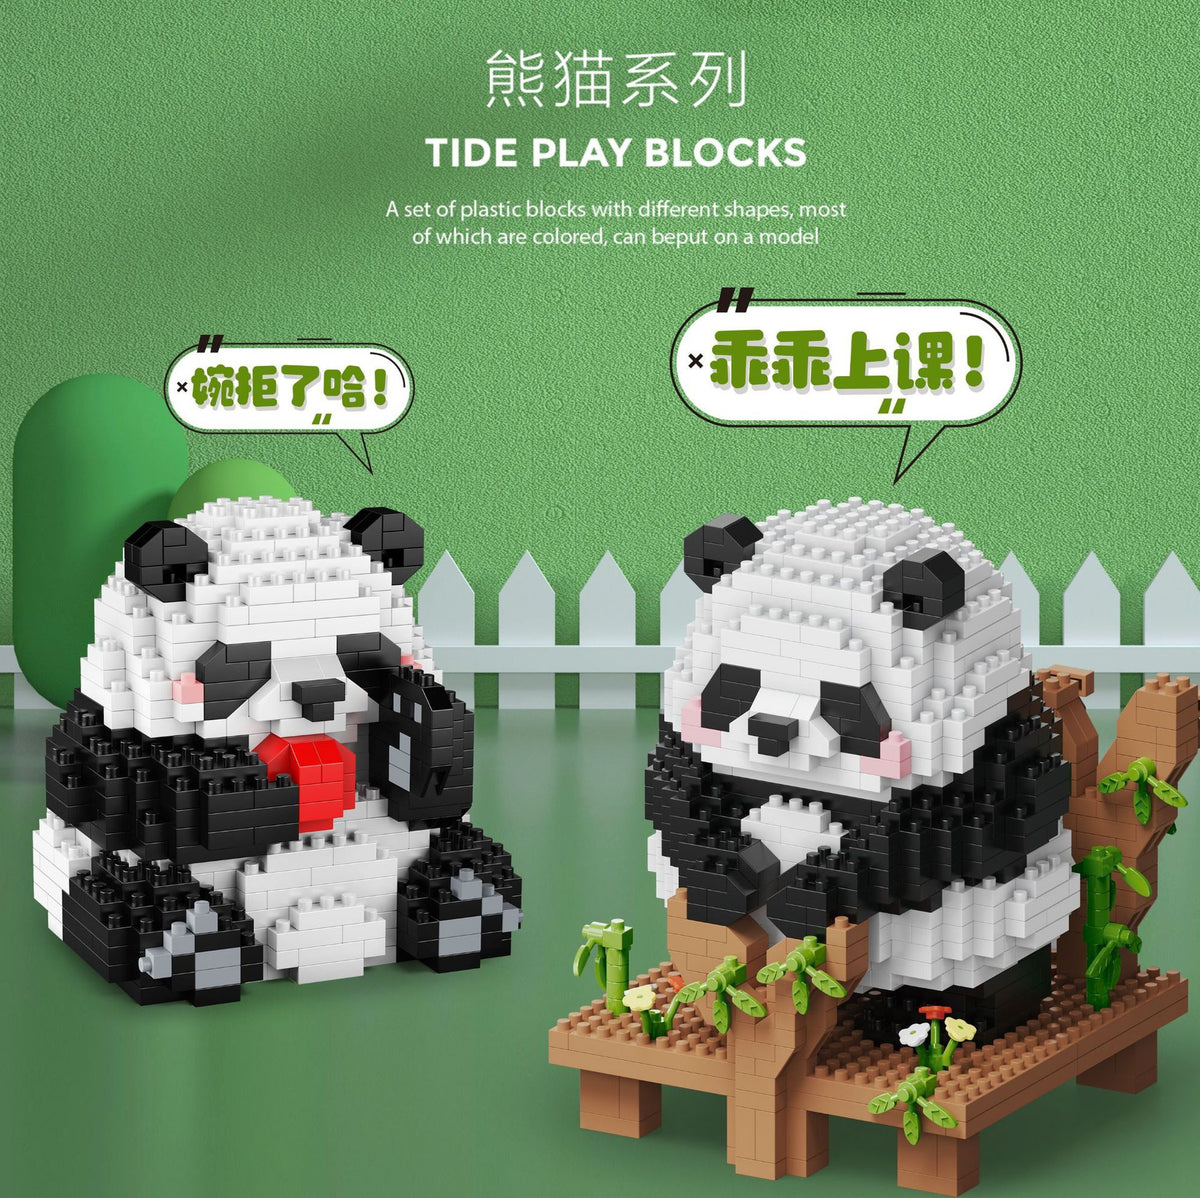 Miniature small particle assembly building block toy ornaments, three-dimensional national tide birthday gifts, handmade panda series